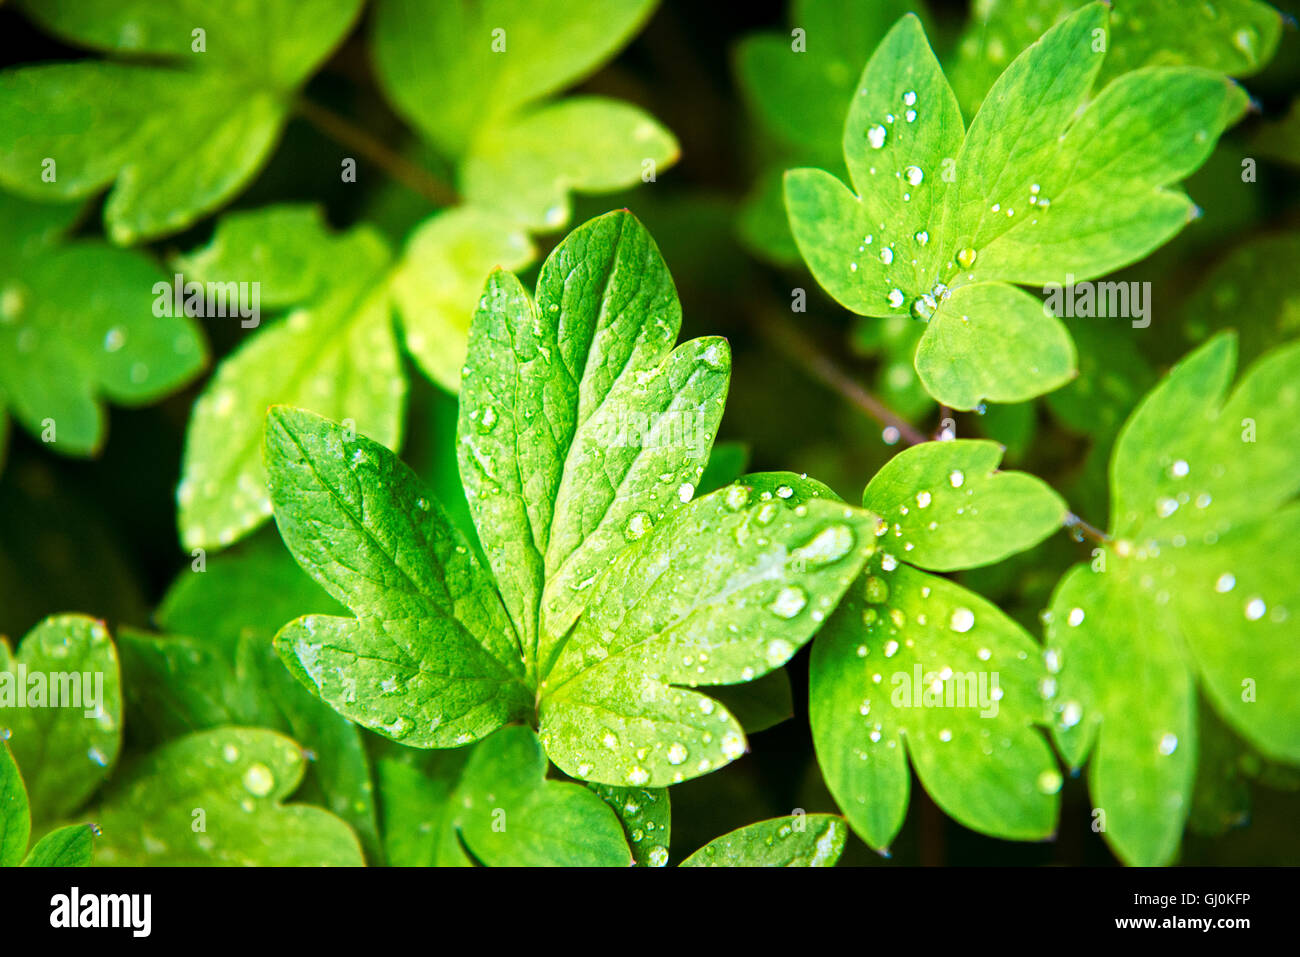 Vert feuilles close up nature abstract Banque D'Images